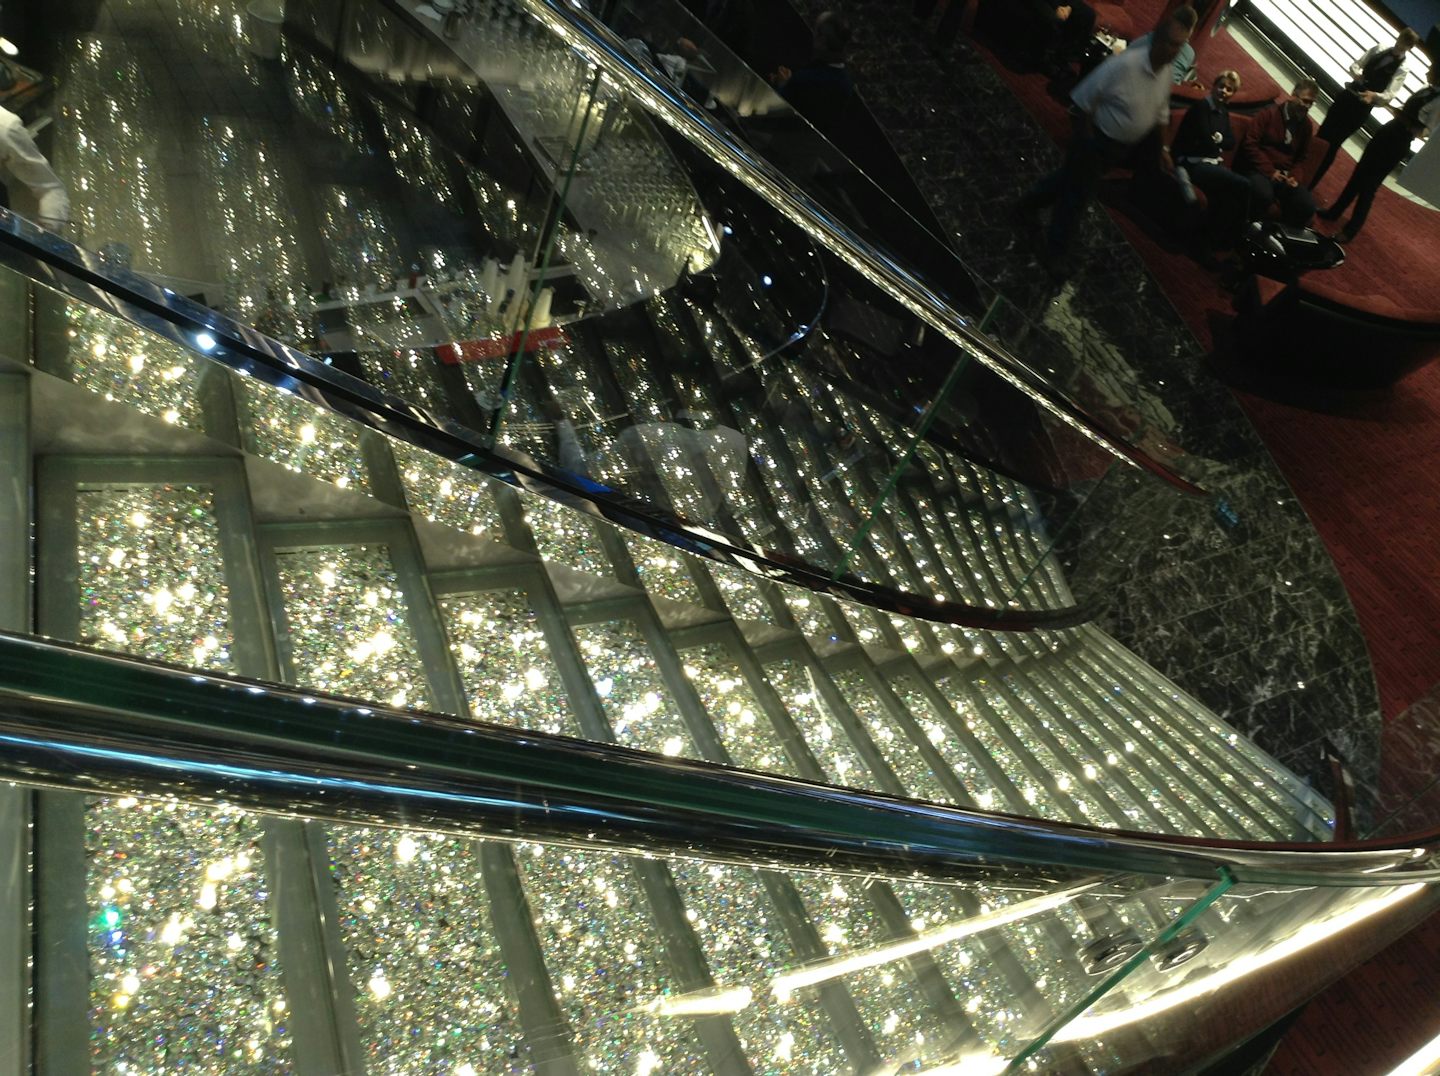 Beautiful stairs in the Atrium.  3 stories of the beautiful Swarovski cryst